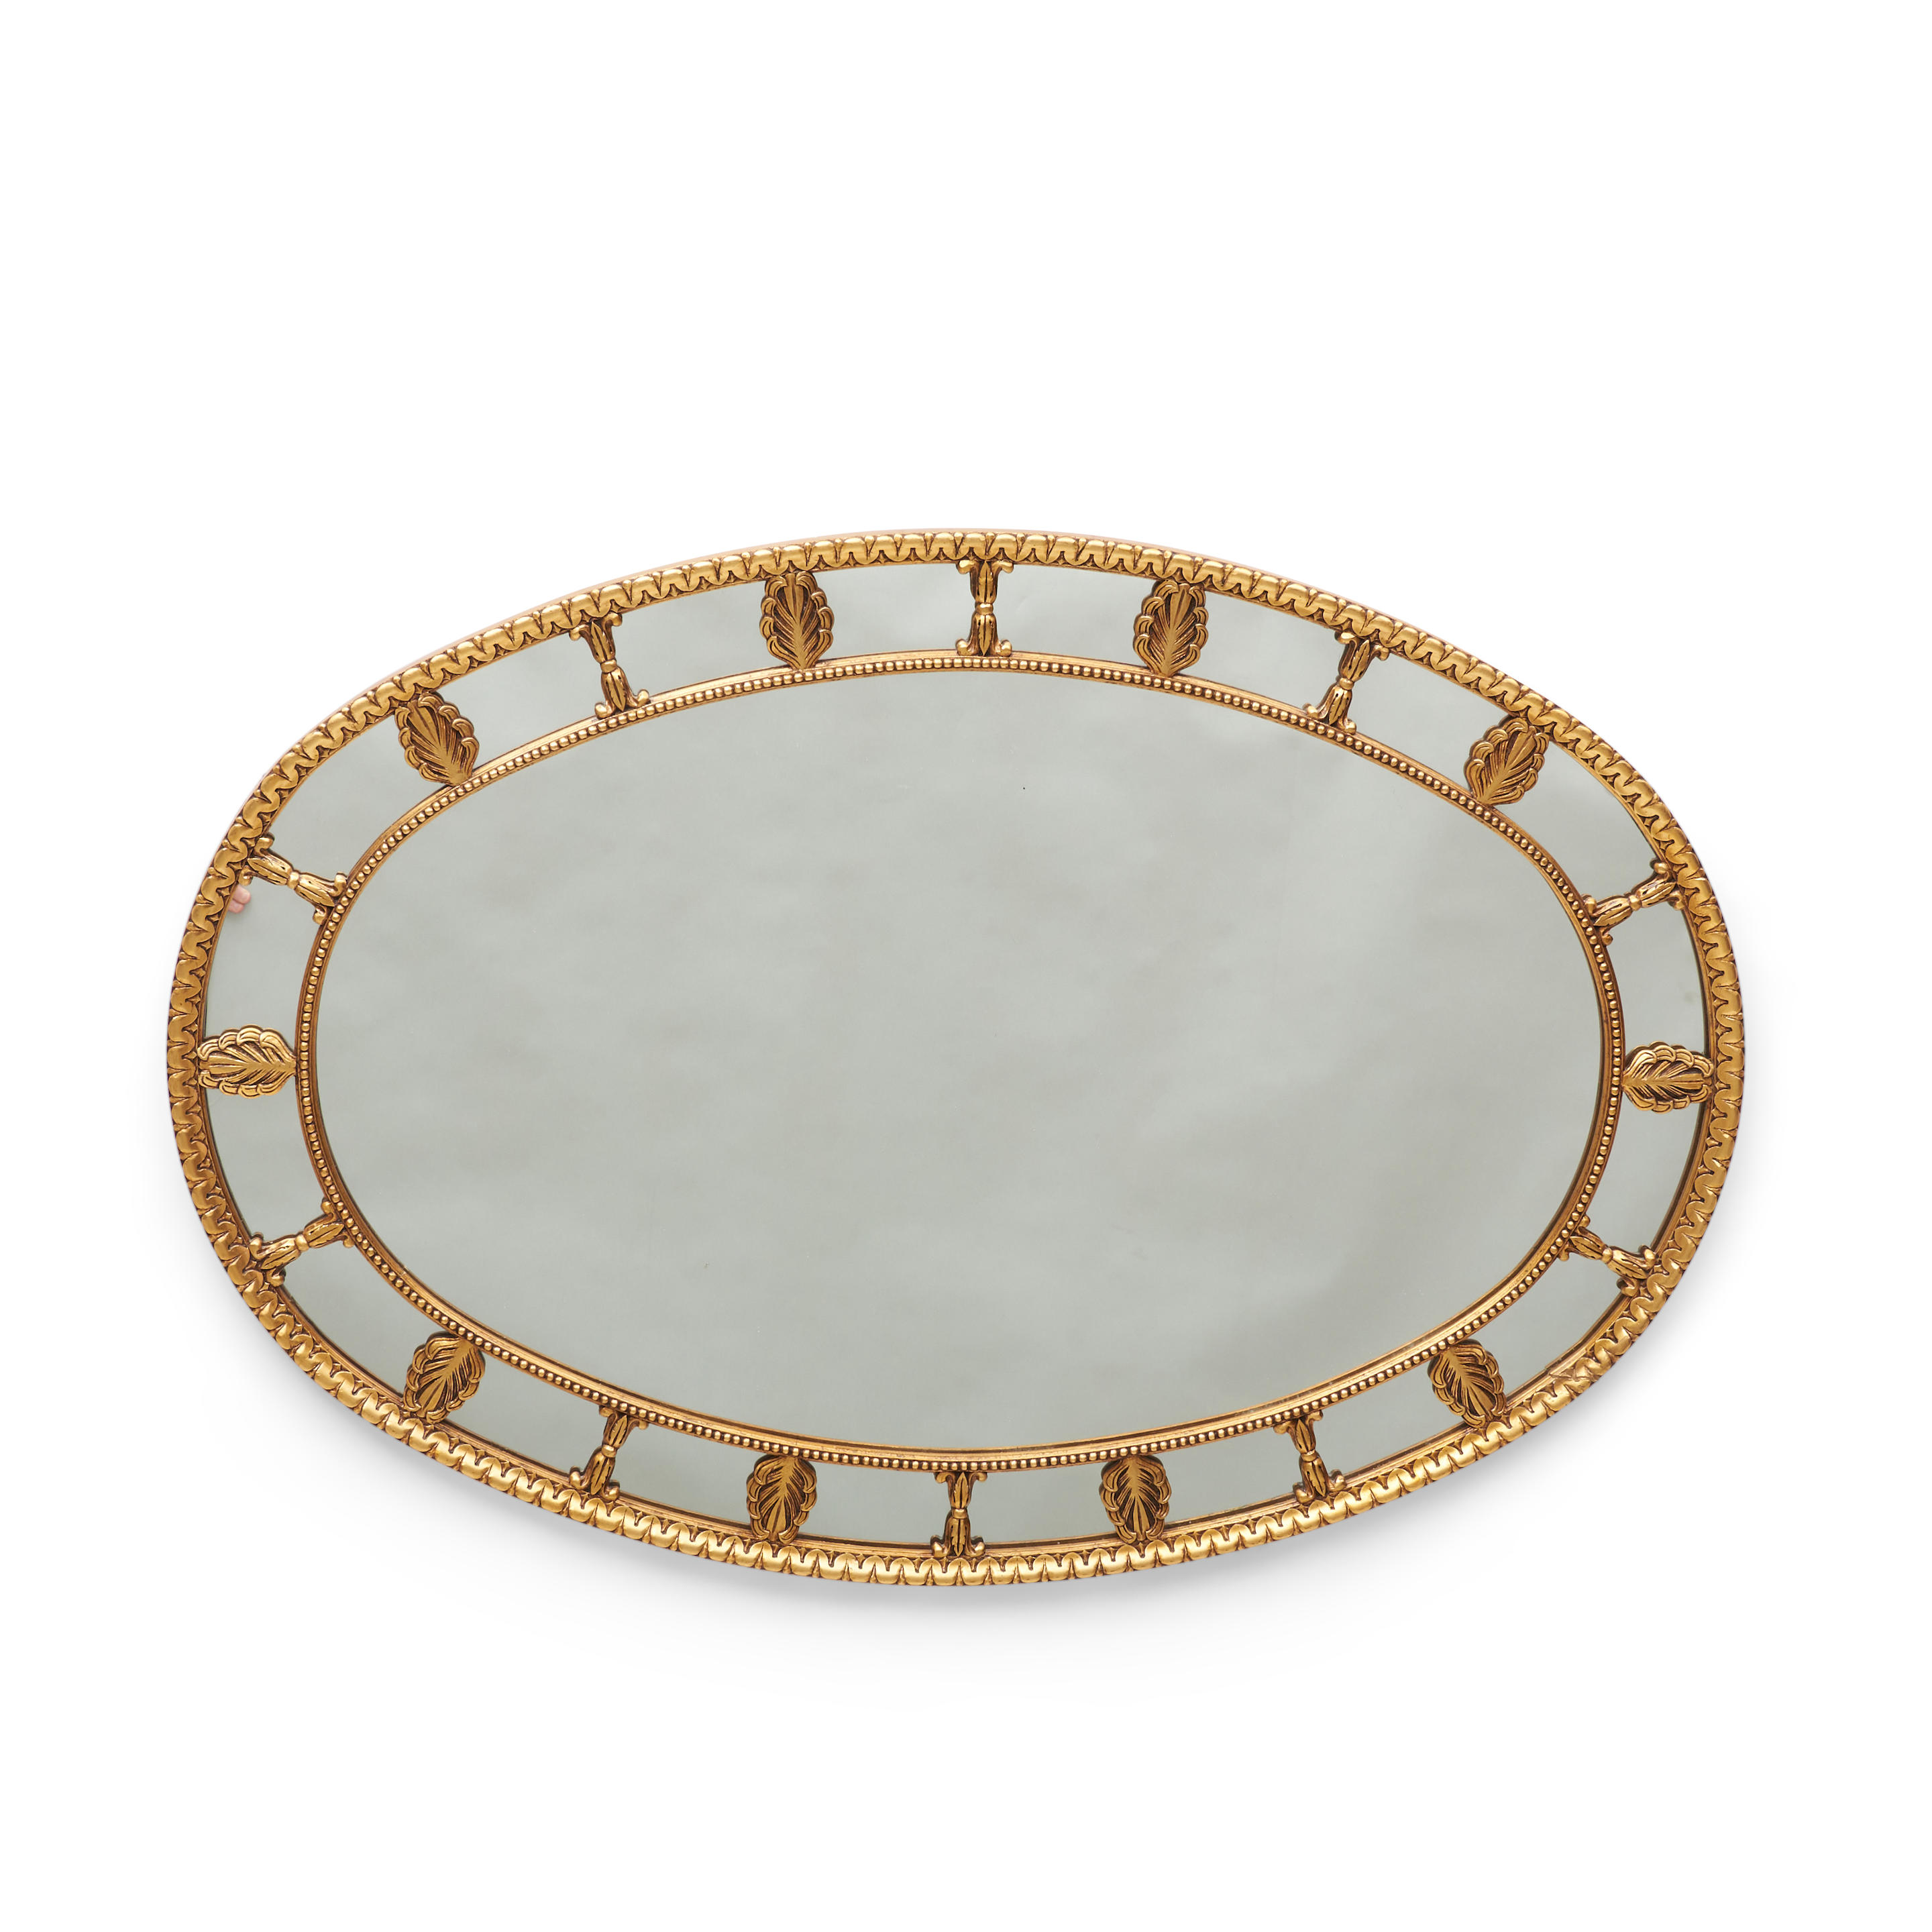 FEDERAL-STYLE GILTWOOD OVER-MANTLE